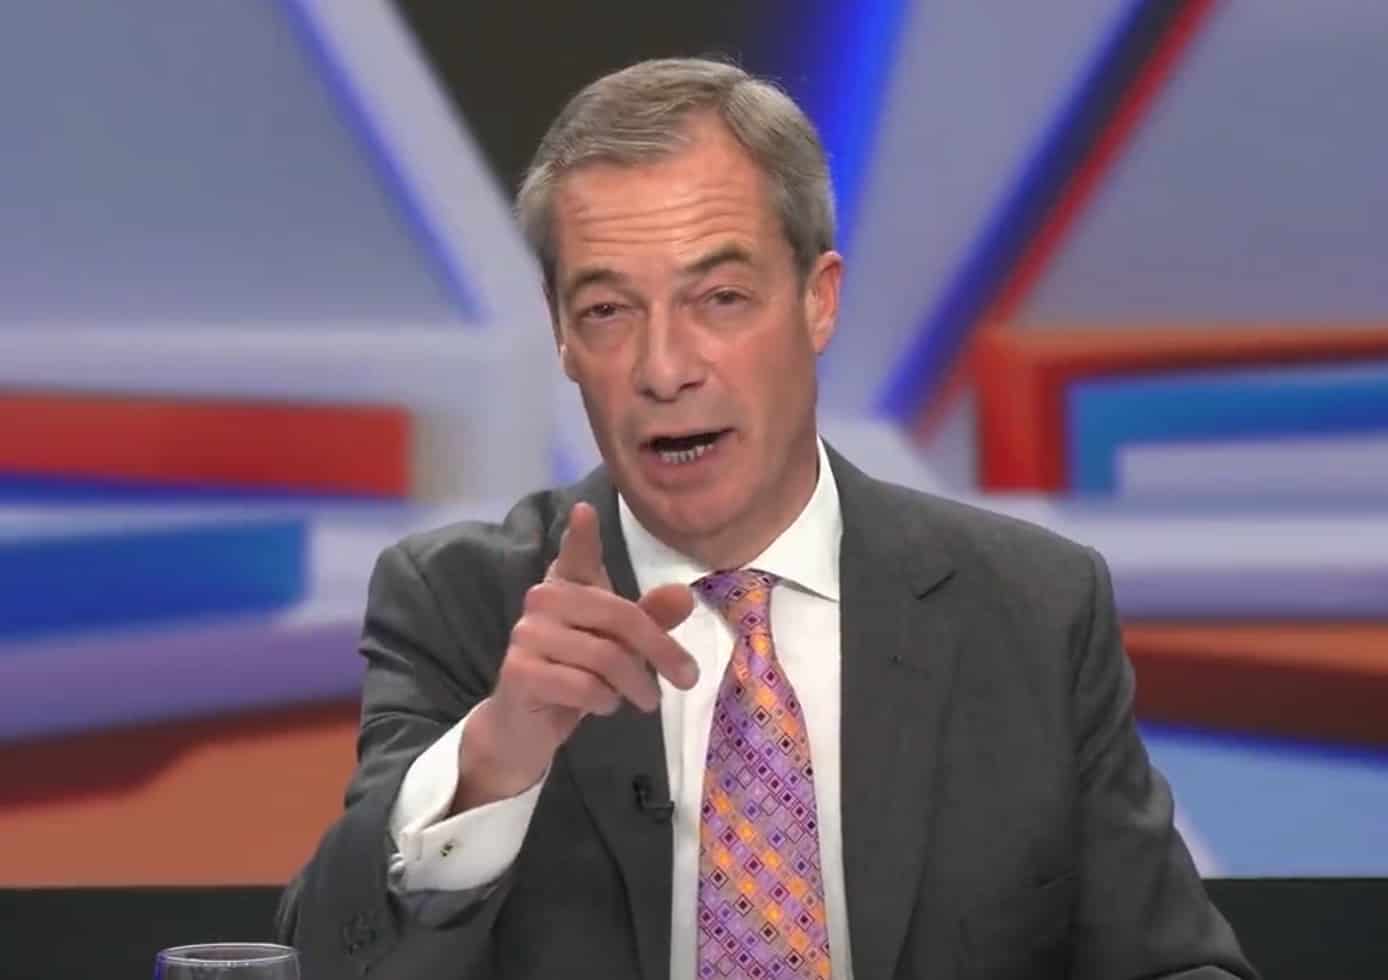 Nigel Farage has called for another referendum